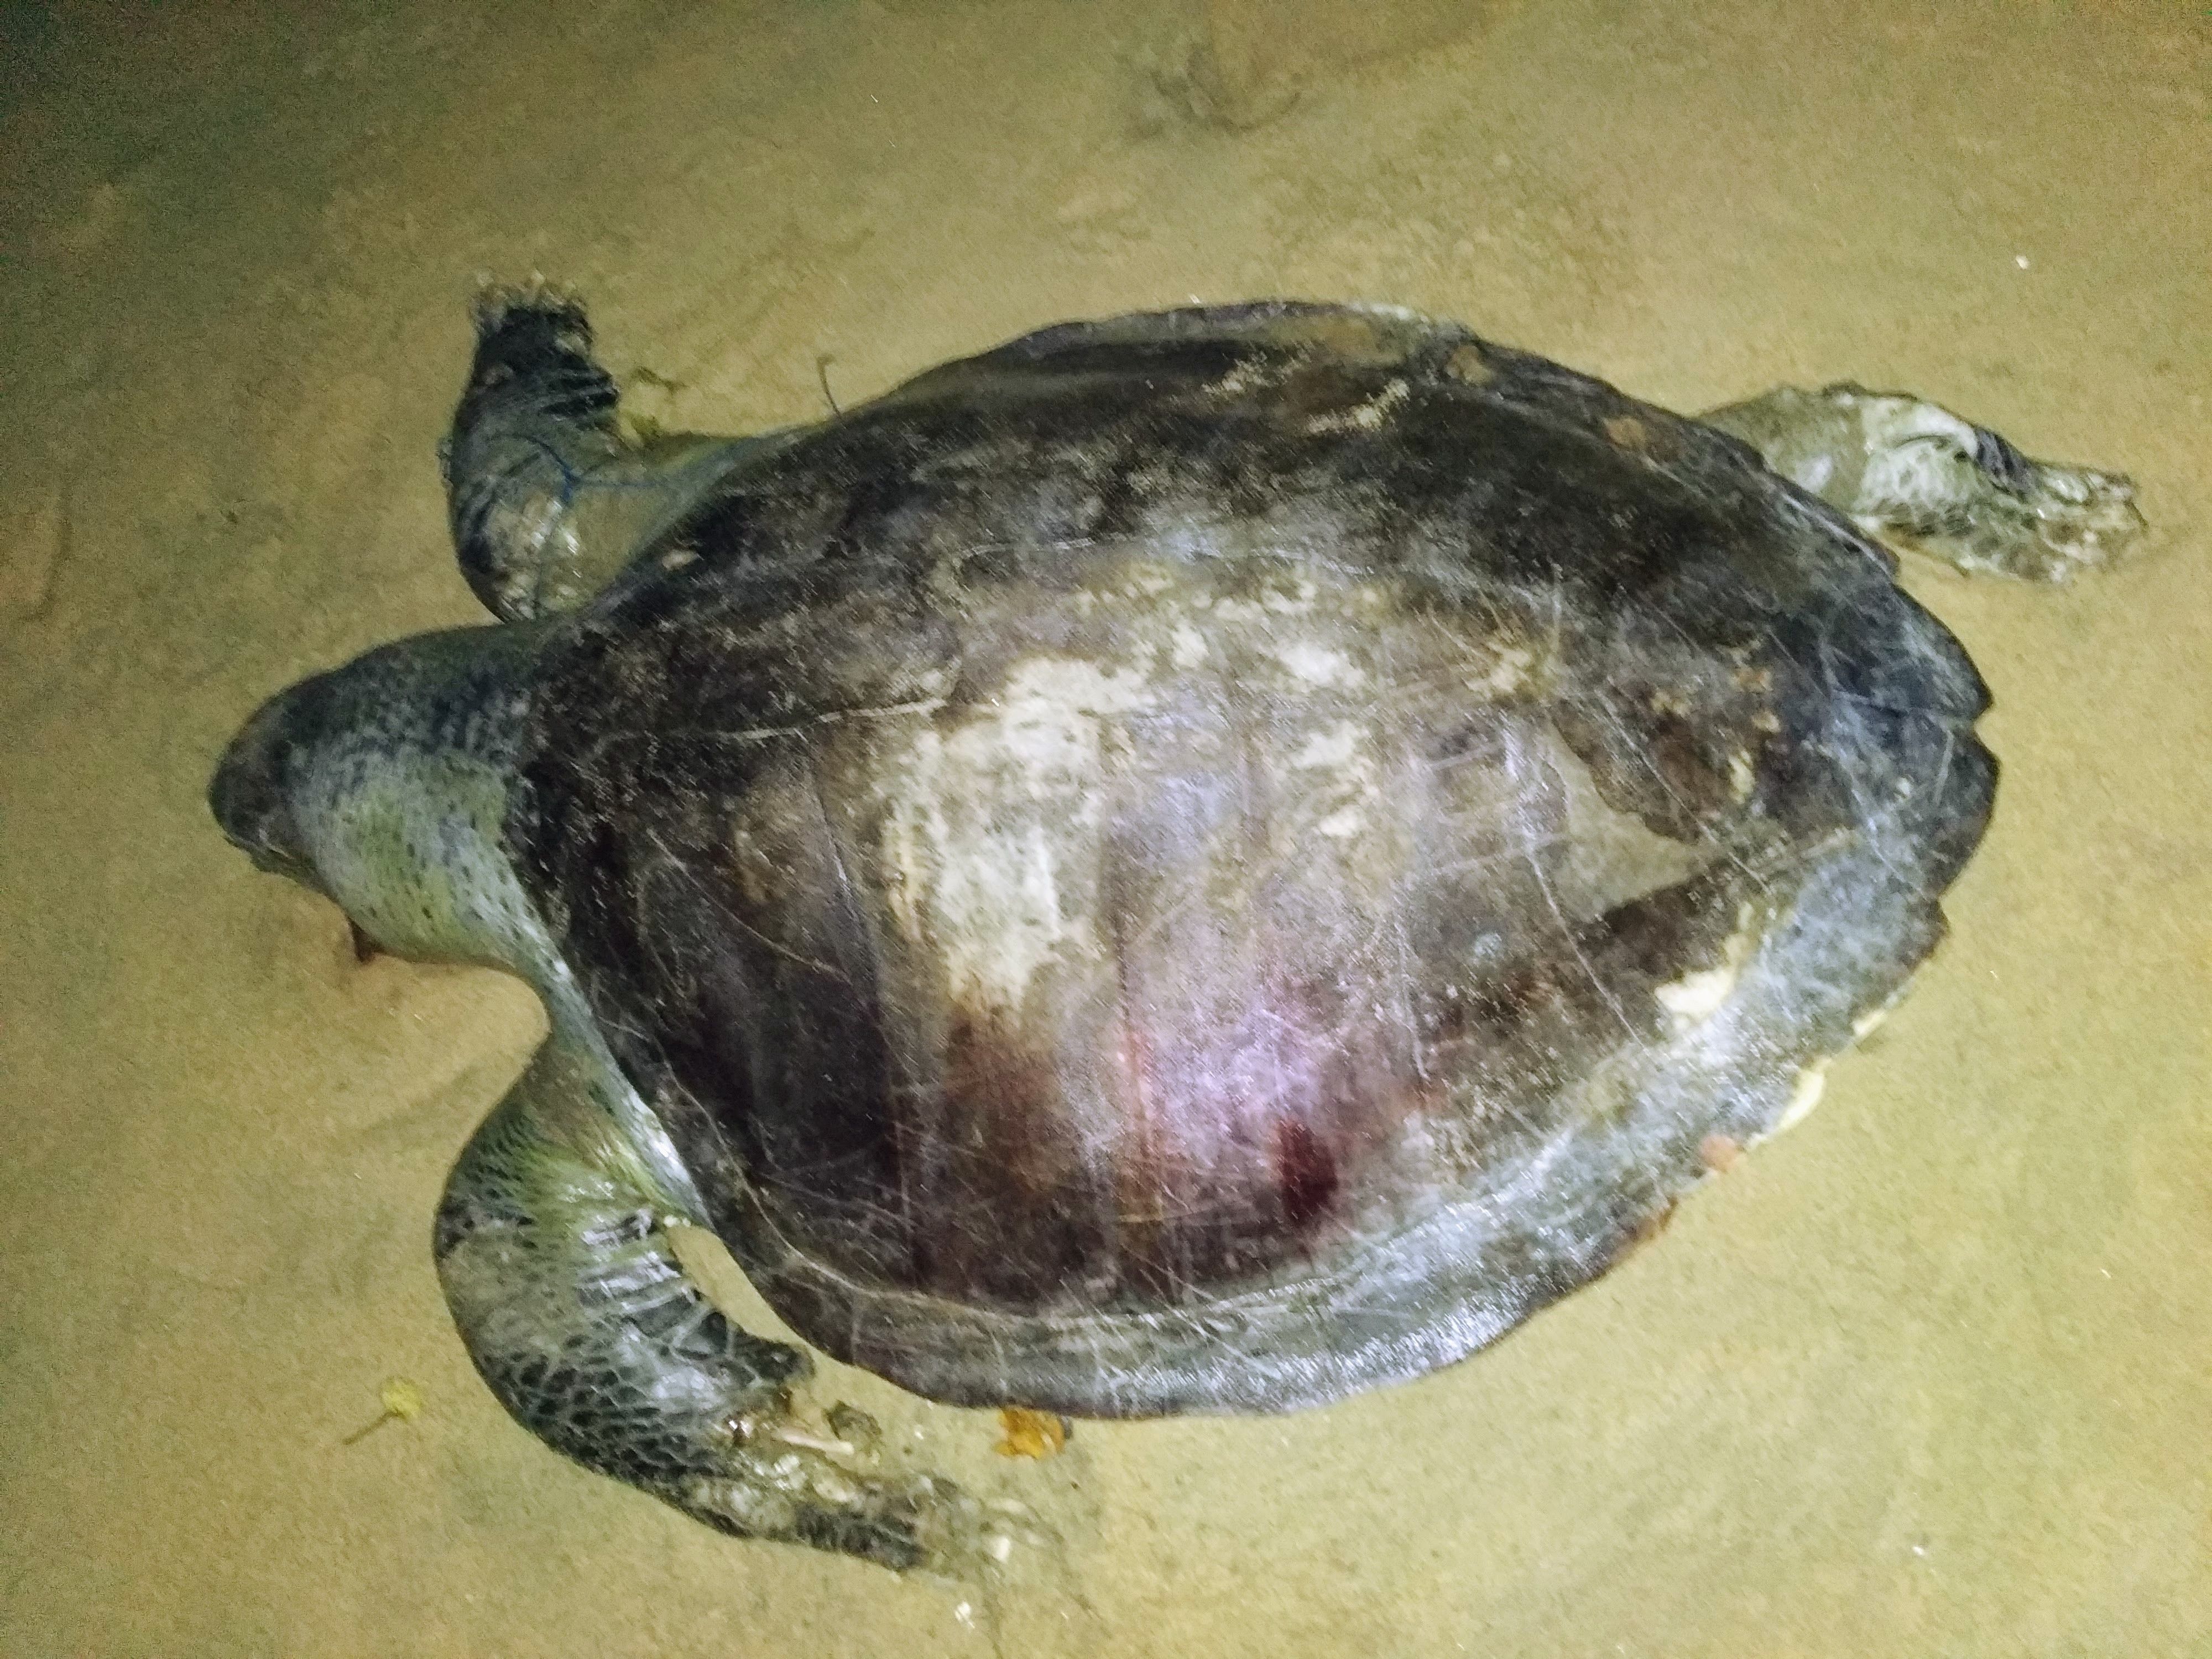 We have found a dead female olive ridley turtle